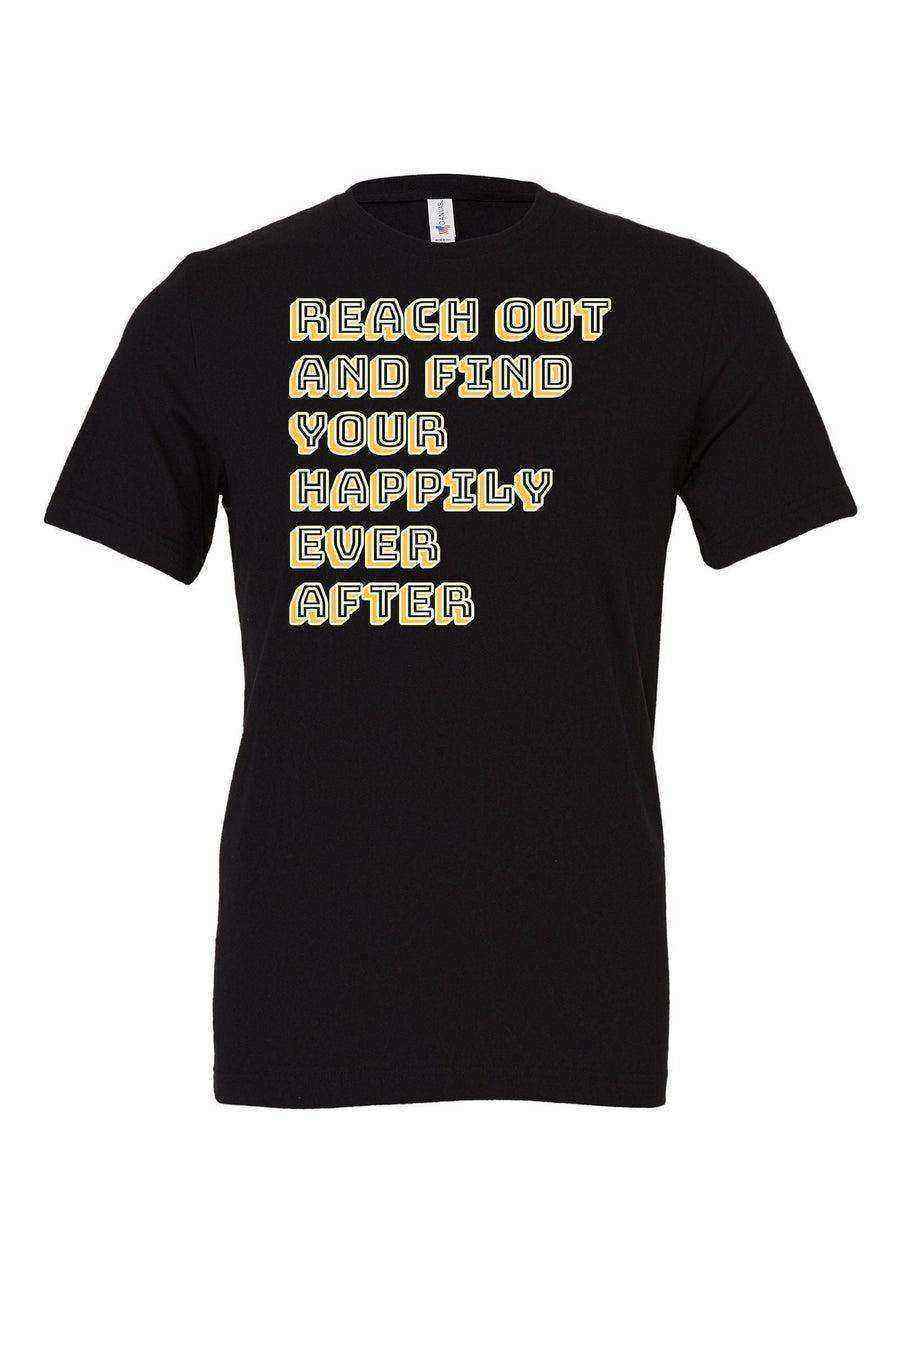 Happily Ever After Shirt | Happily Ever After Lyrics Shirt - Dylan's Tees